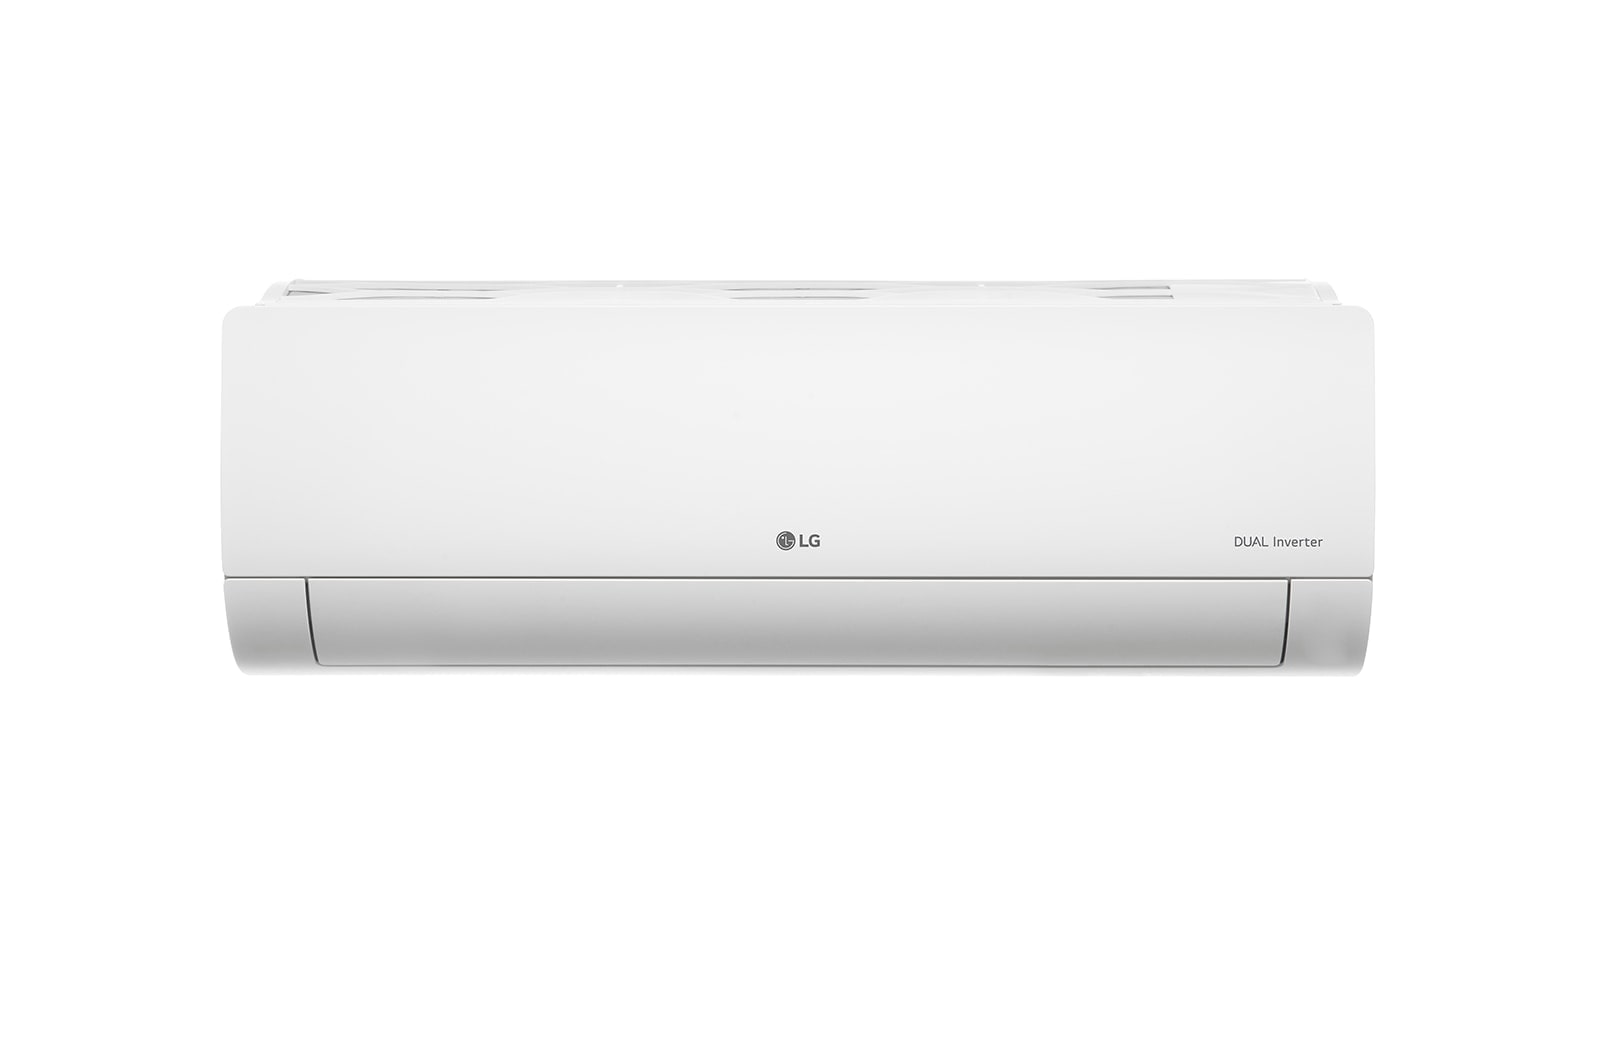 LG RS-Q13JNYE split air conditioner front view